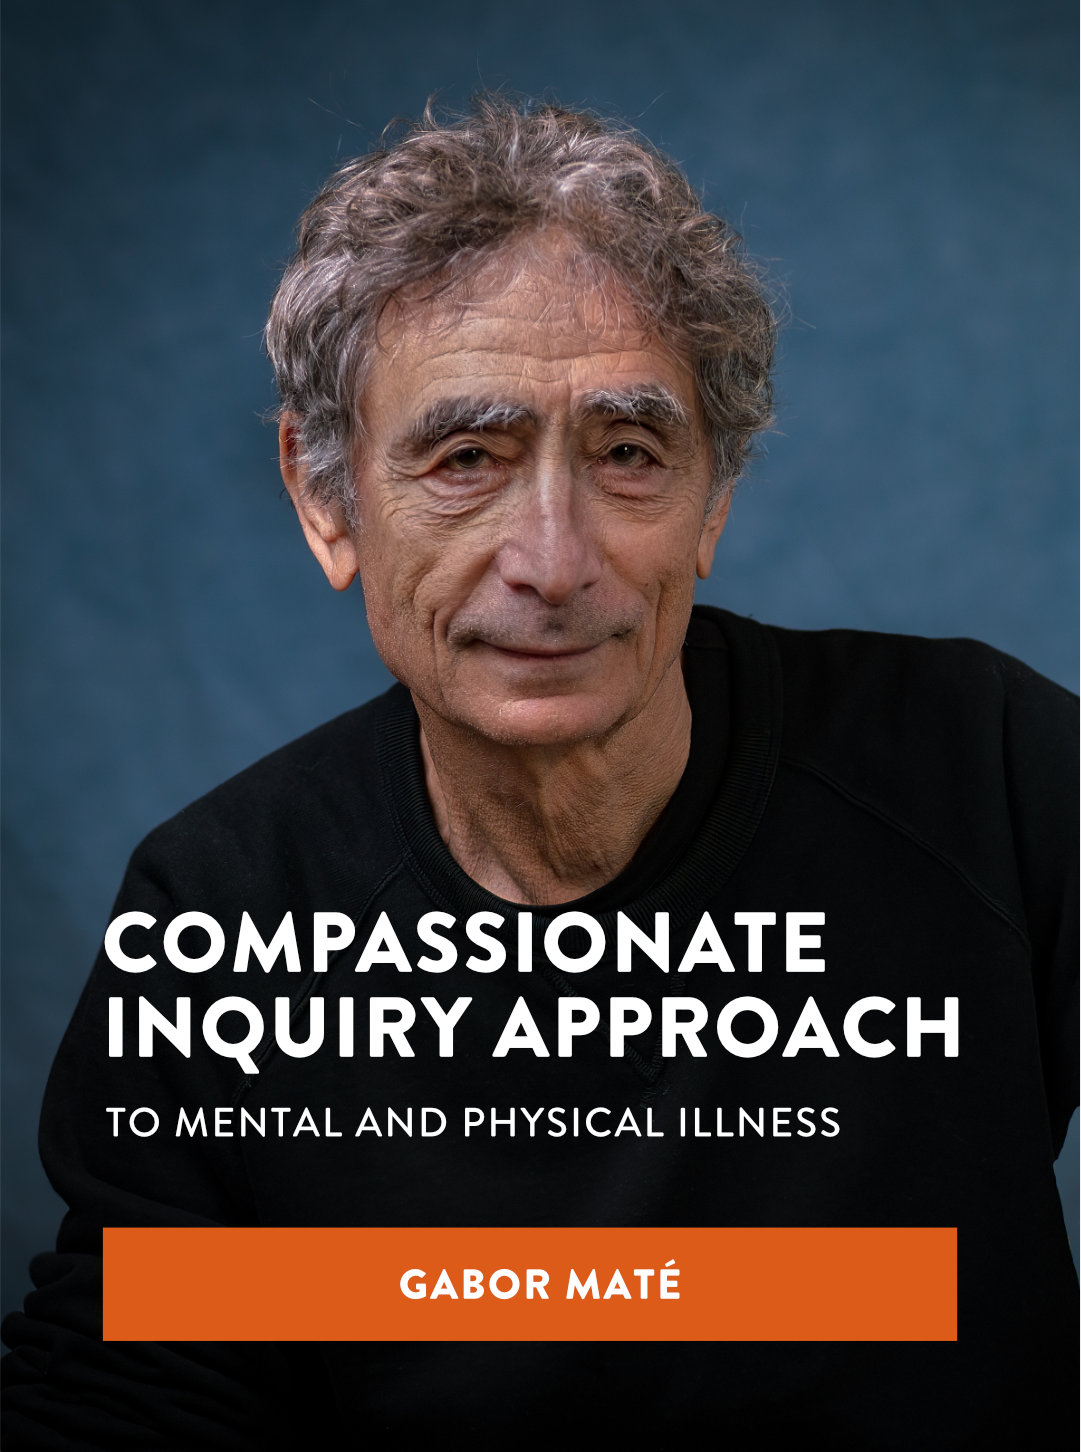 Compassionate Inquiry Approach to Mental and Physical Illness